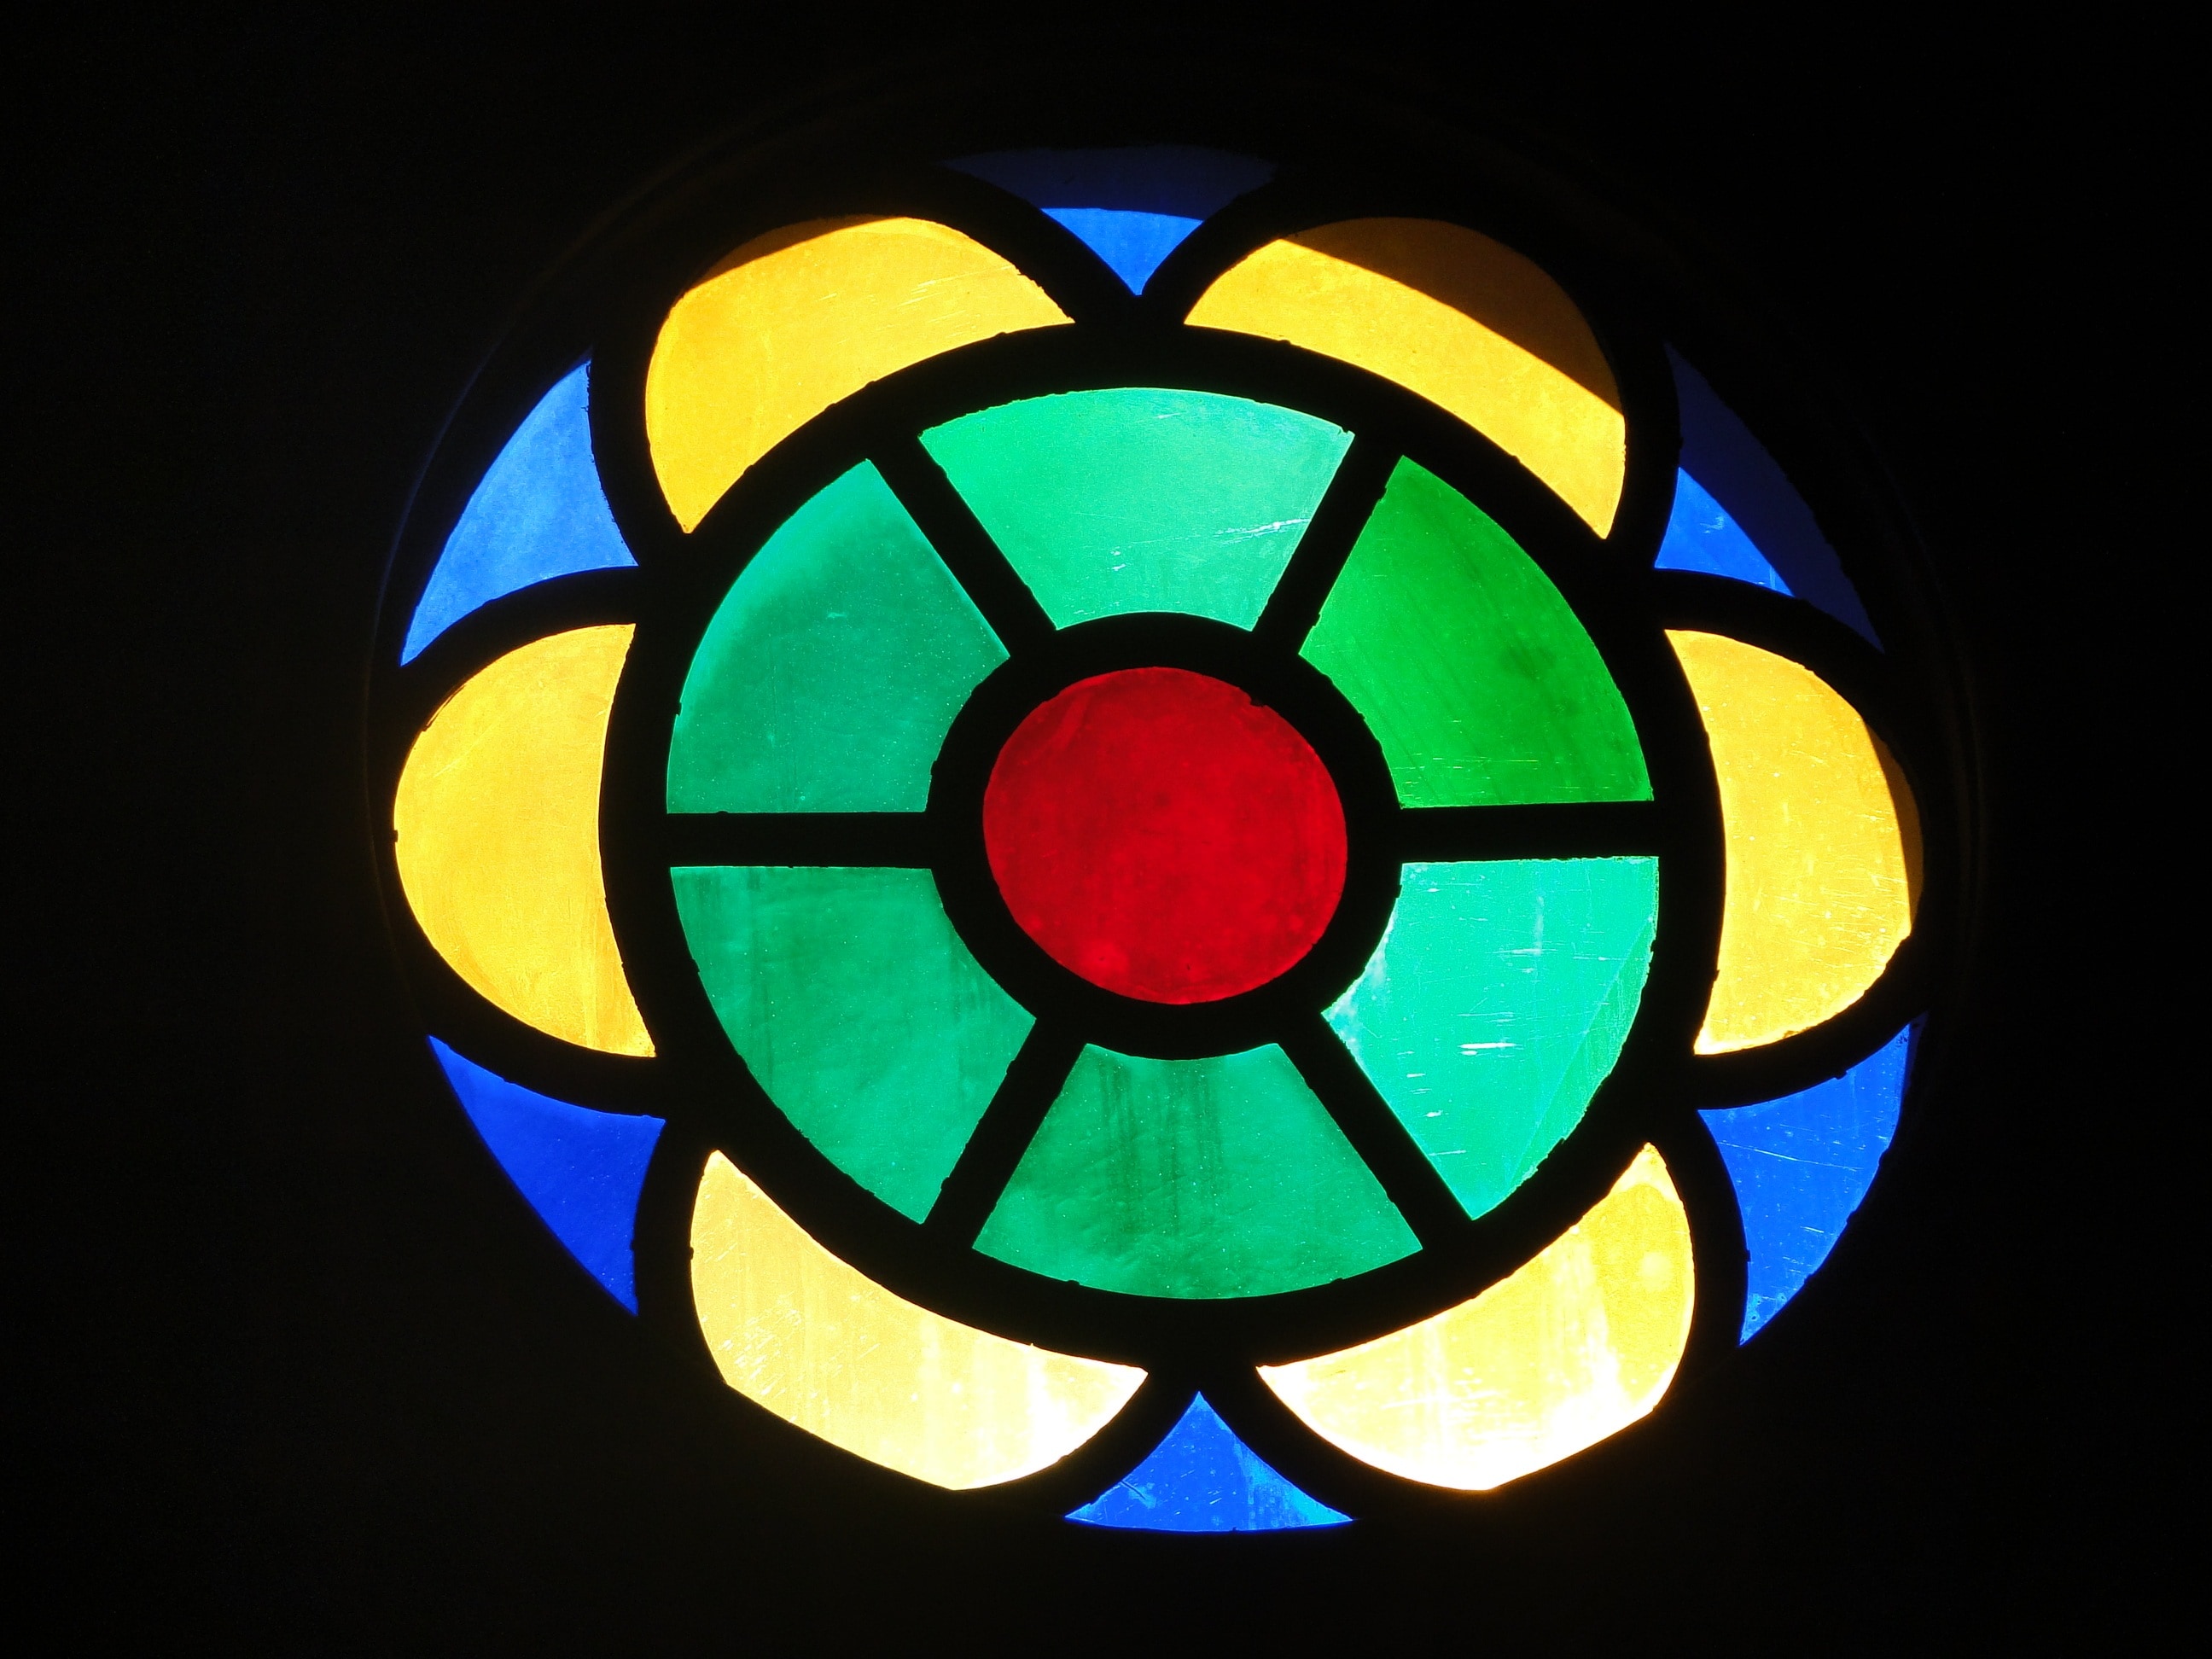 Glass, Art, Sacra, Stained Glass, Chapel, multi colored, circle